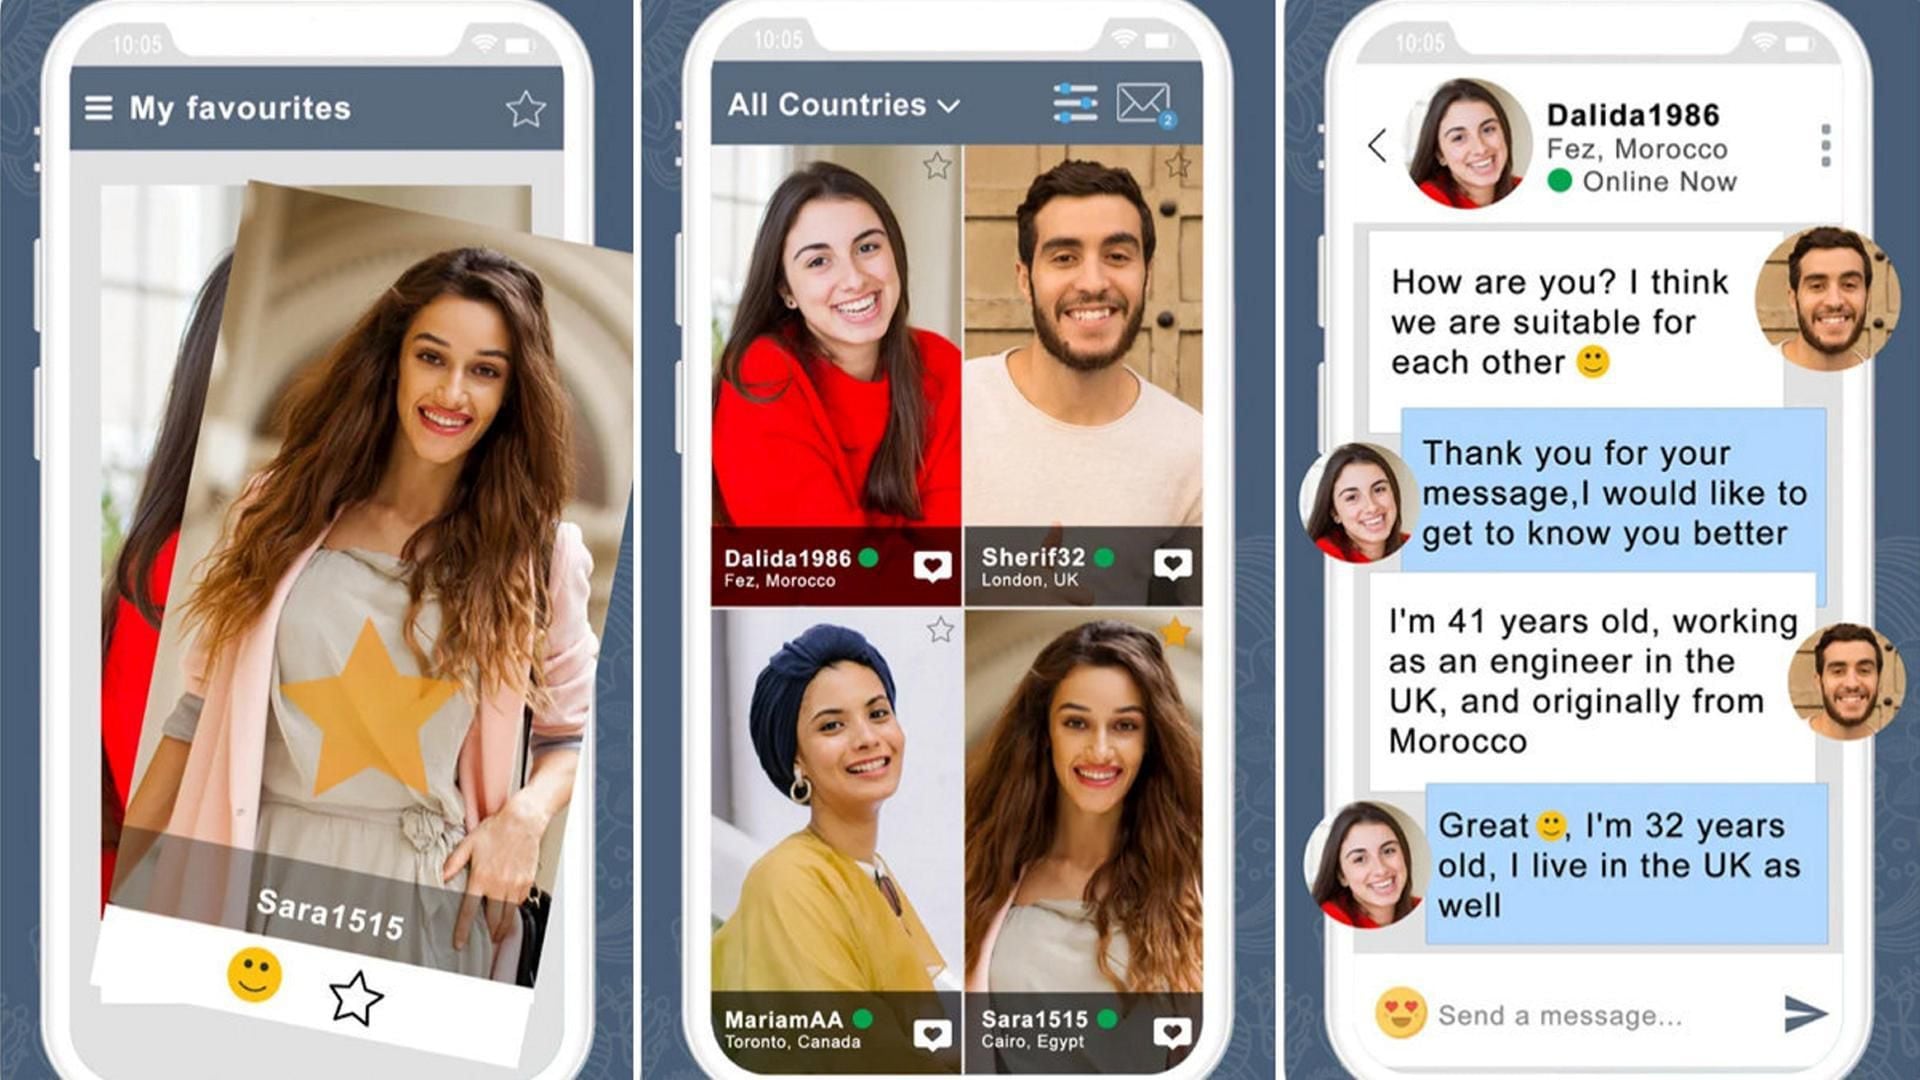 5 Muslim Dating Sites to Find Your Other Half in 2019